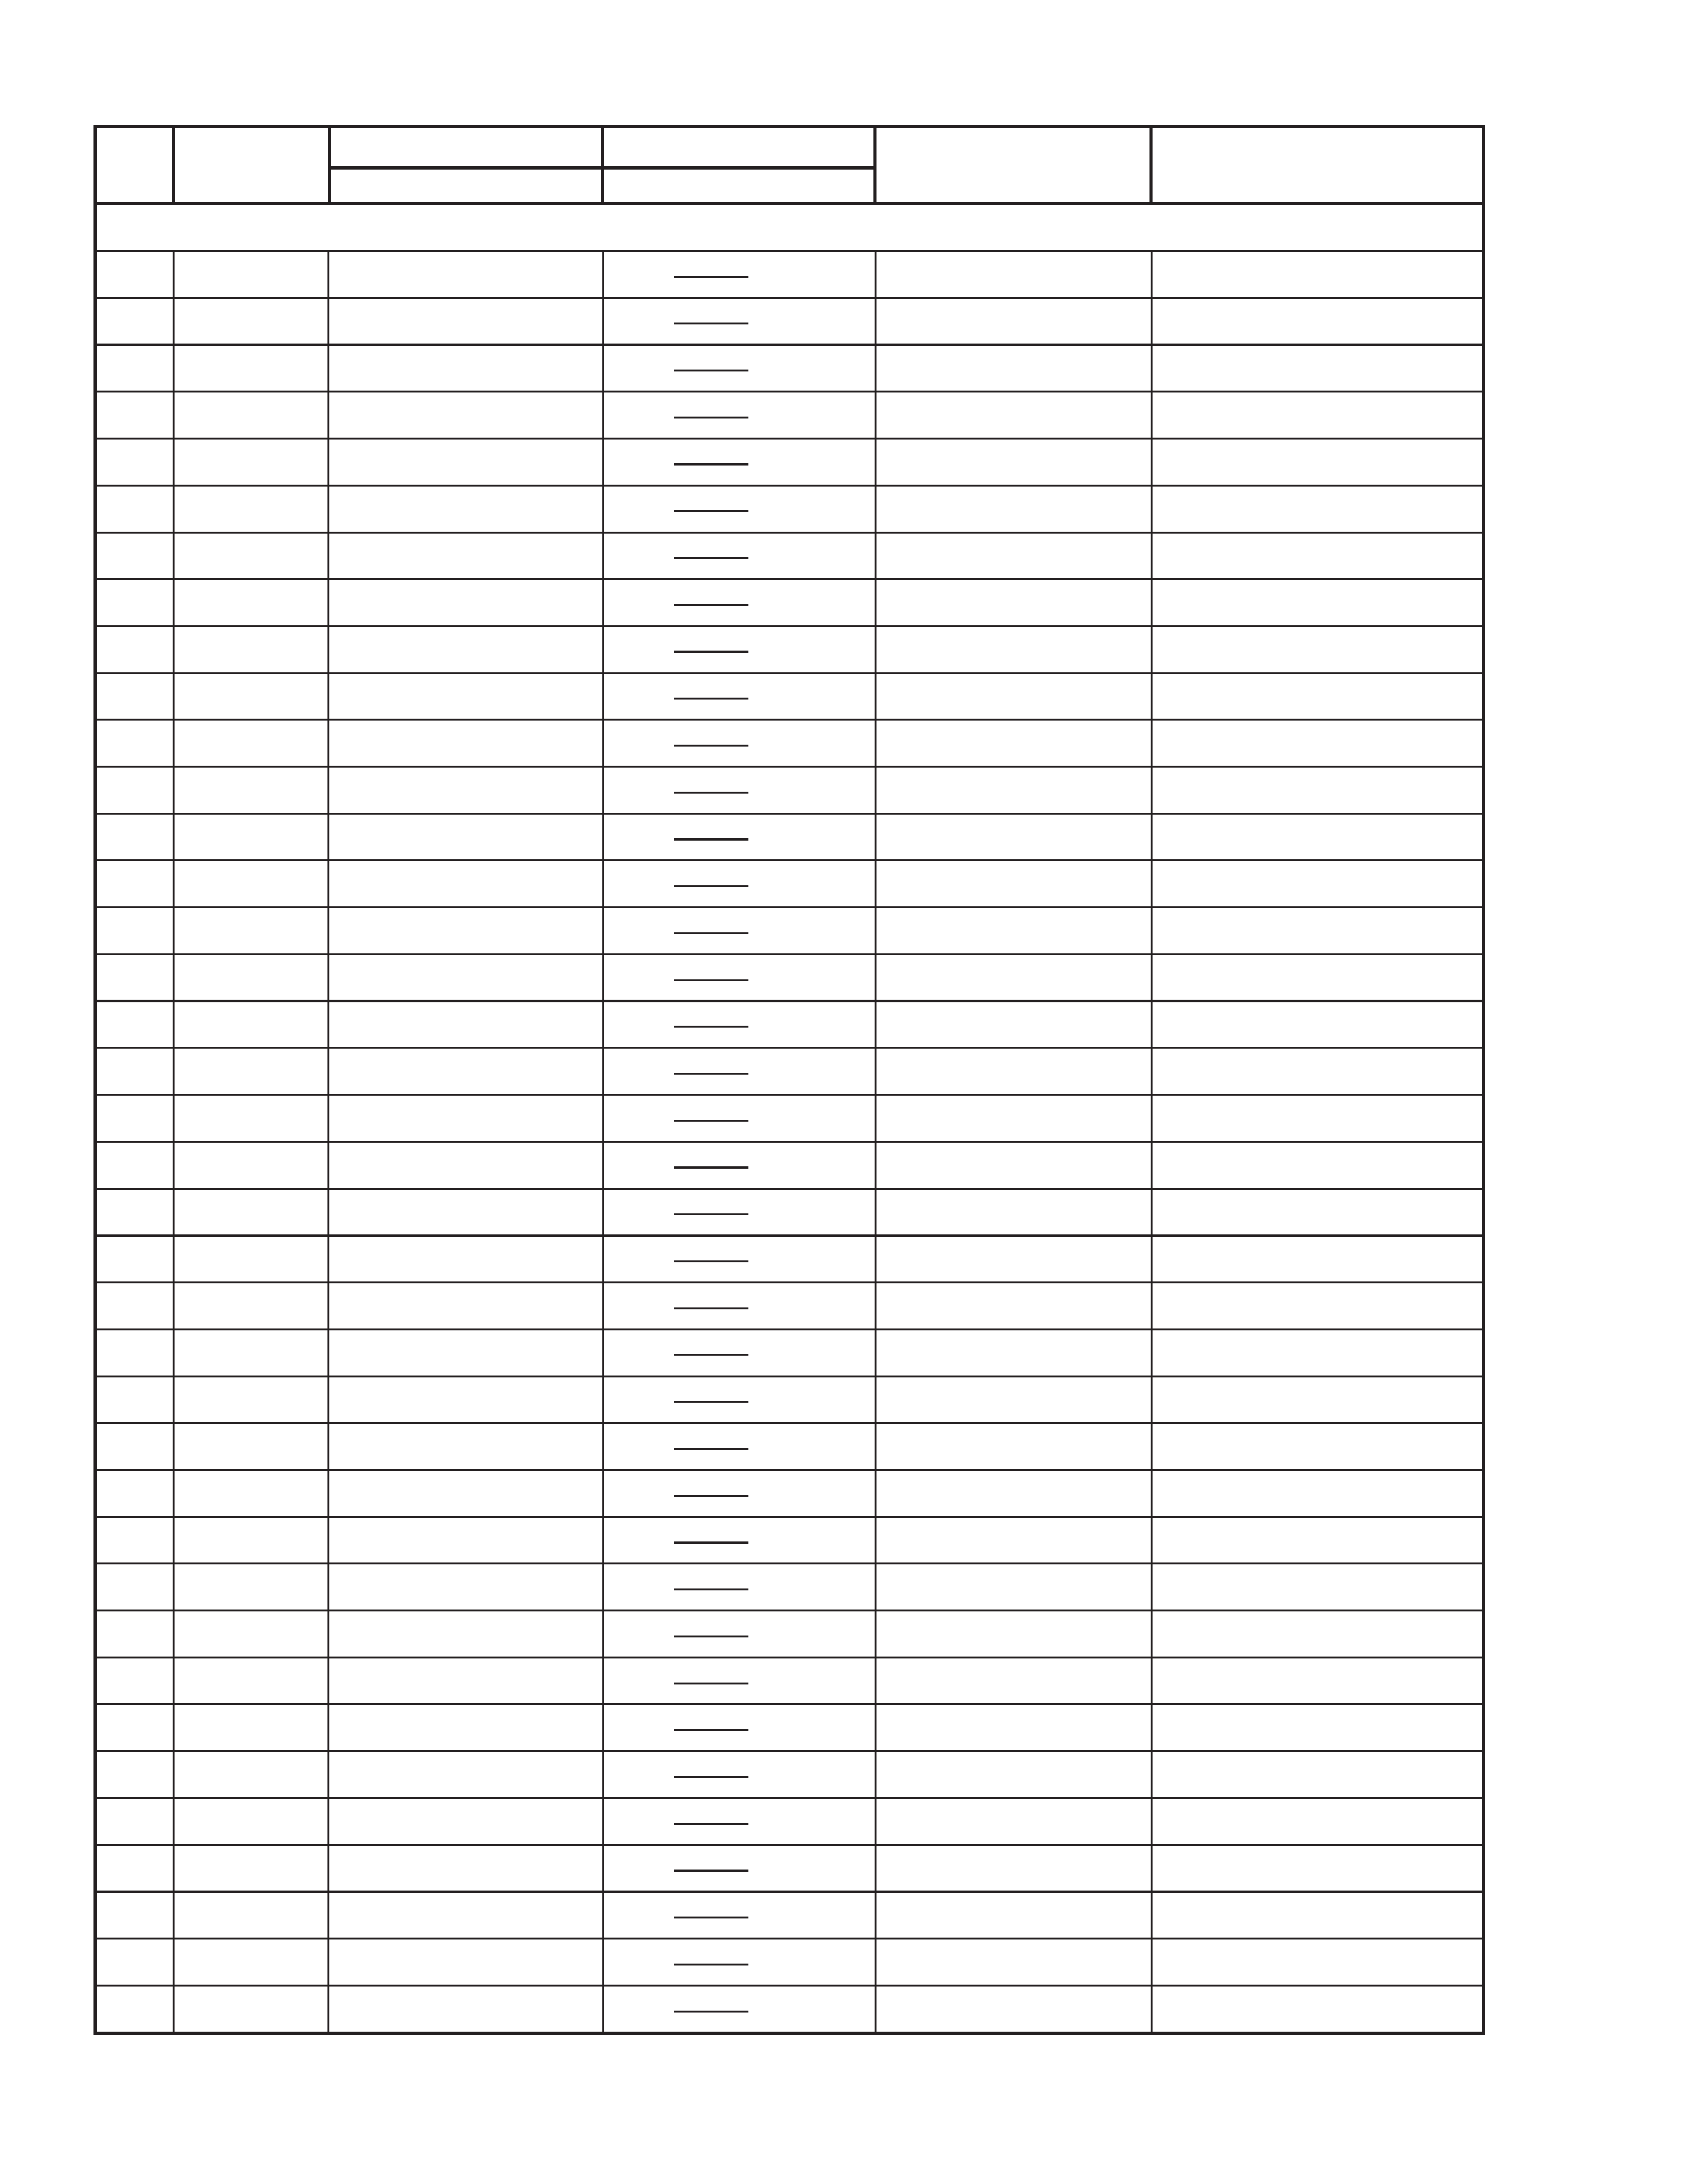 AV-21PS. s PRINTED WIRING BOARD PARTS LIST-Continued (Page 34-). 